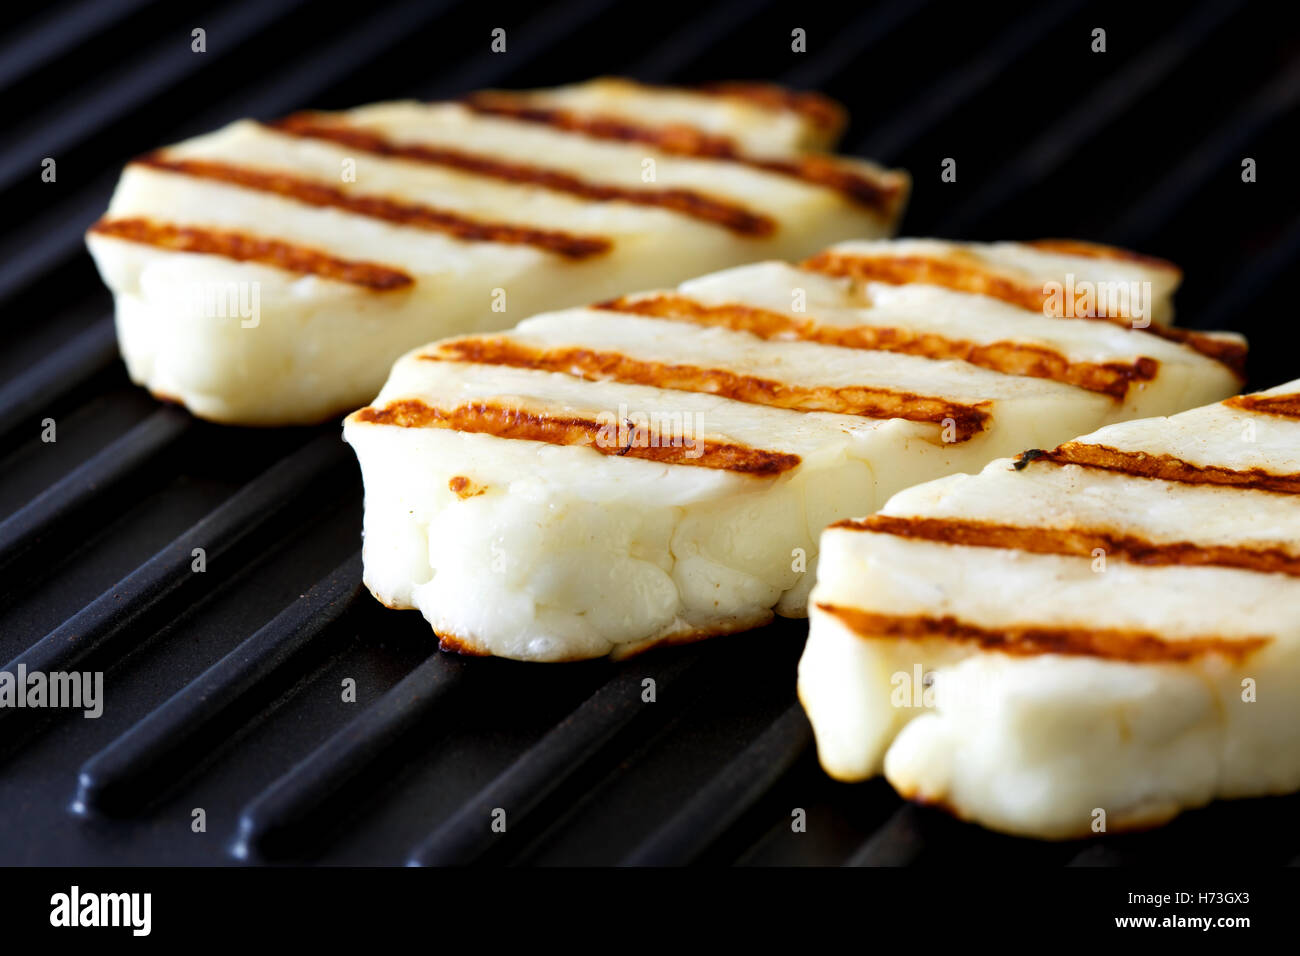 Three grilled slices of halloumi cheese on grill in perspective. With grill marks. Stock Photo